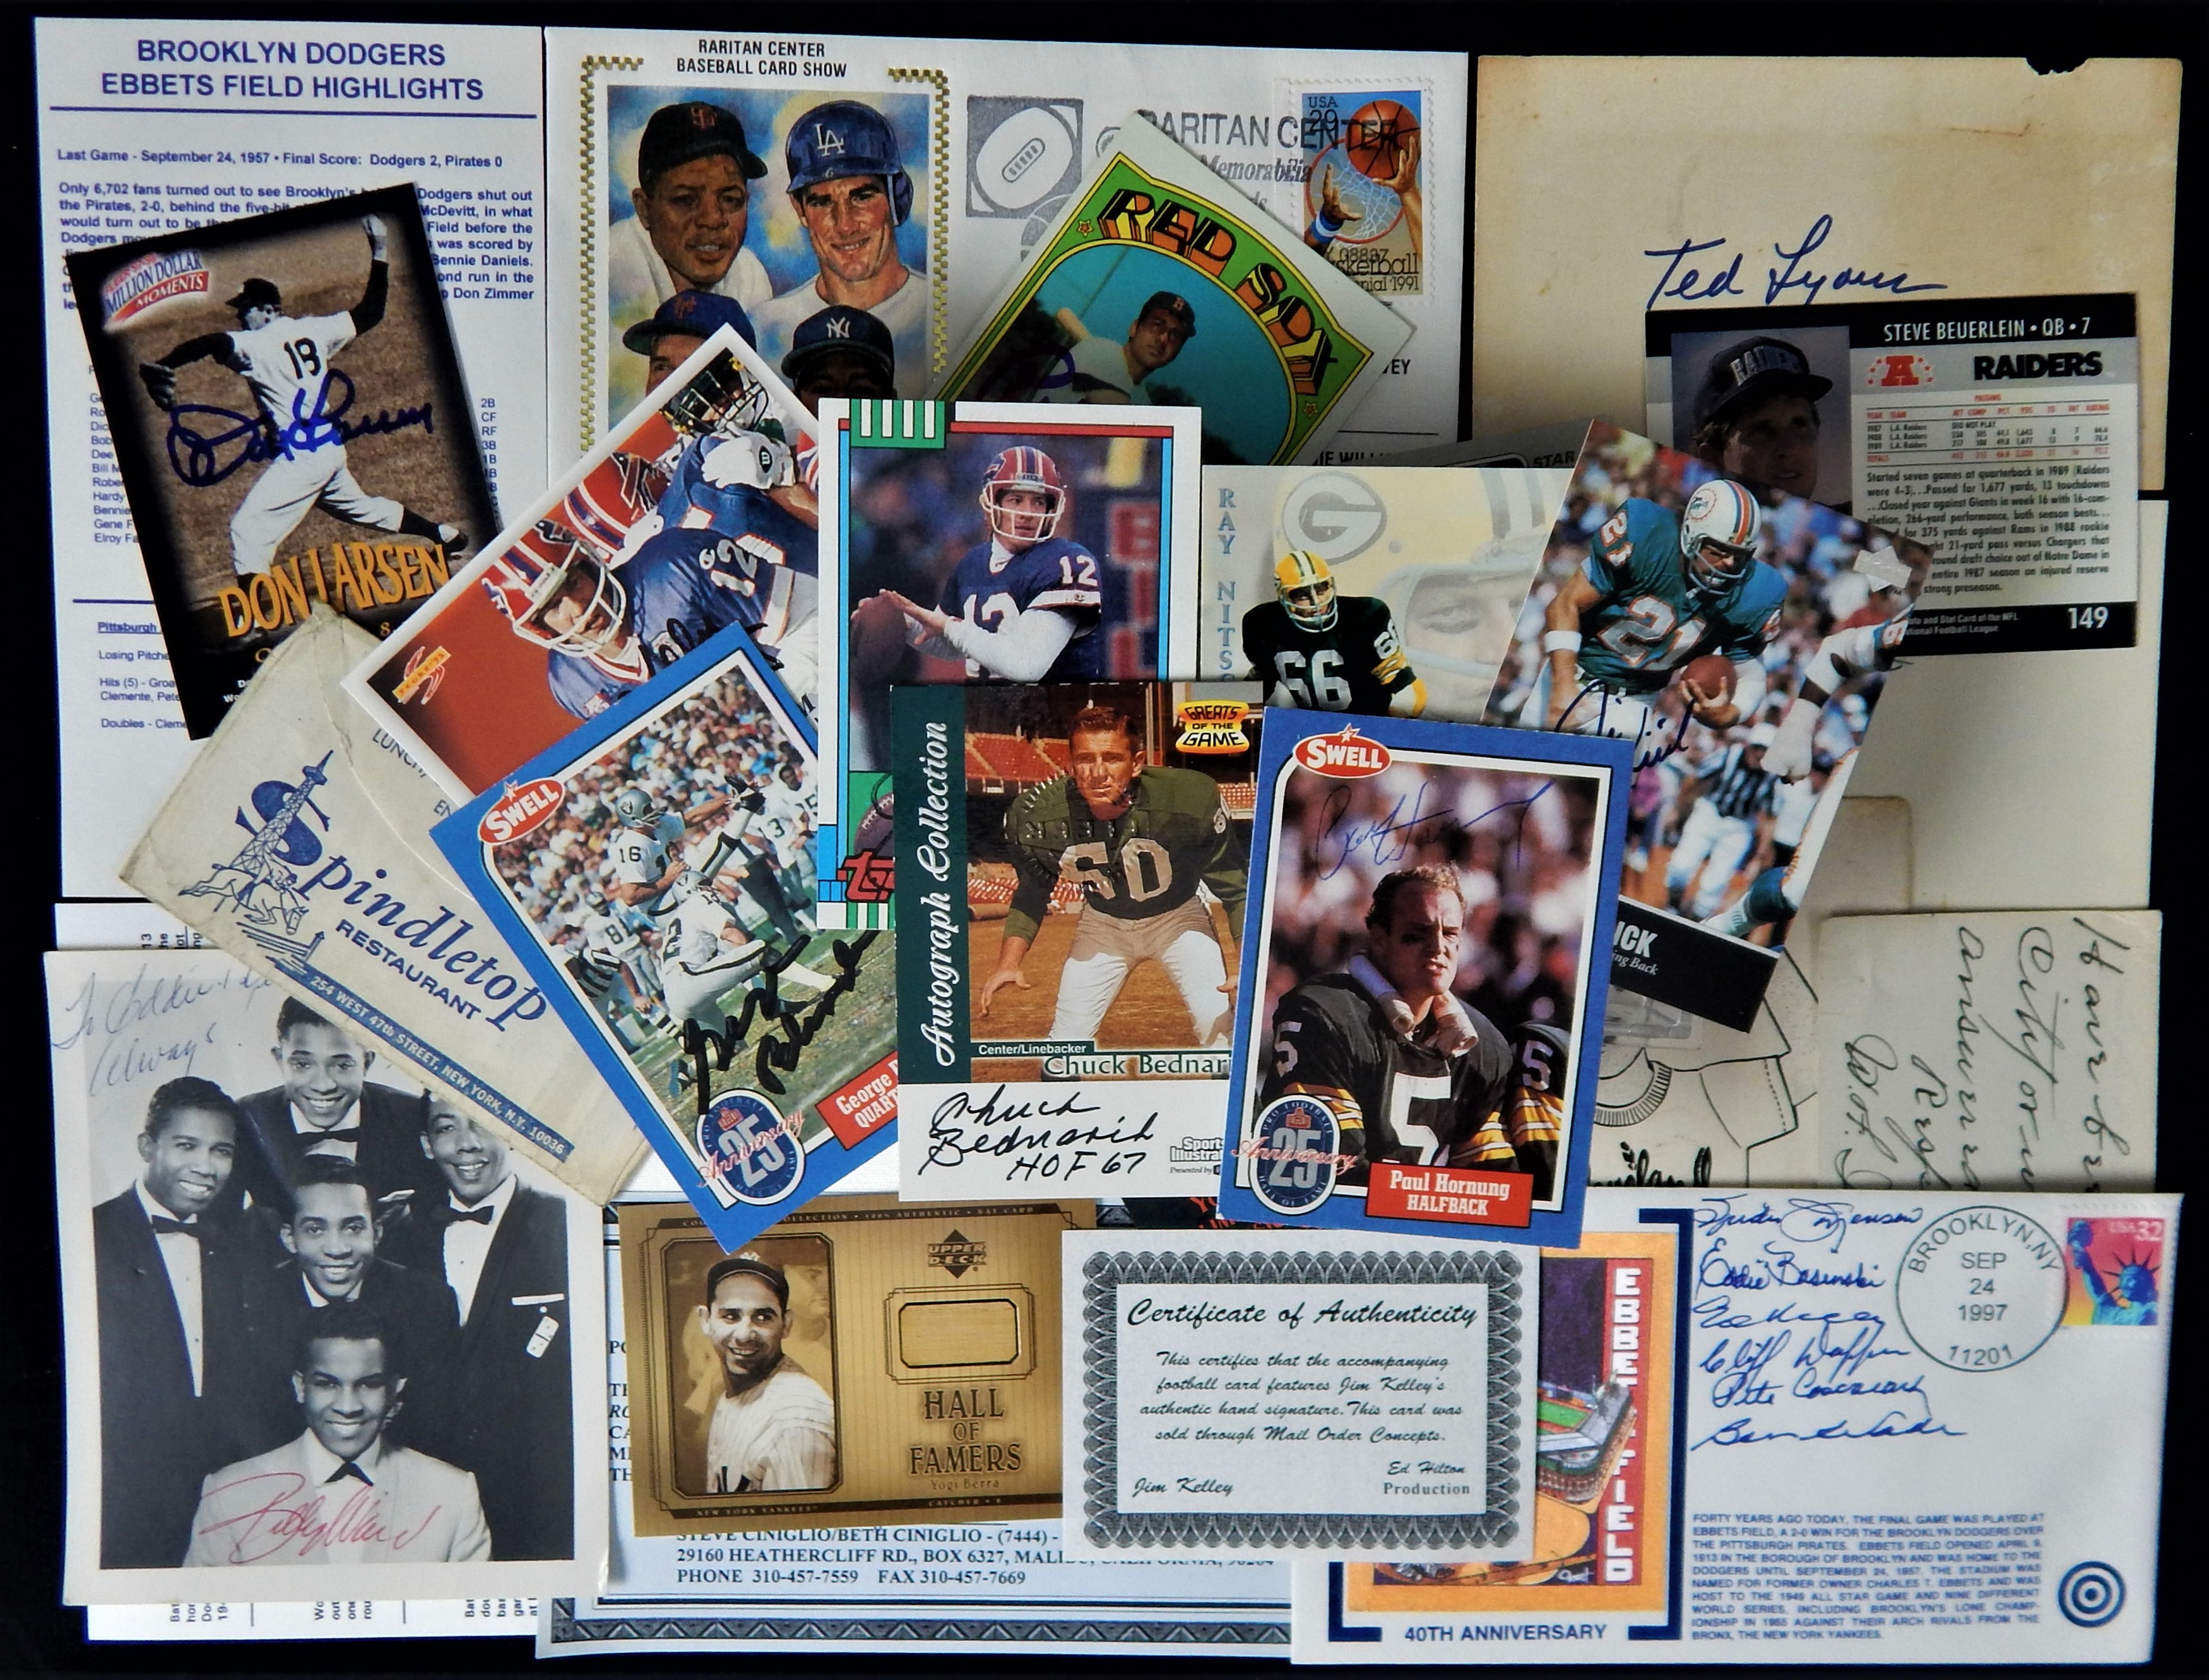 Large Sports Card and Autographed Memorabilia Collection